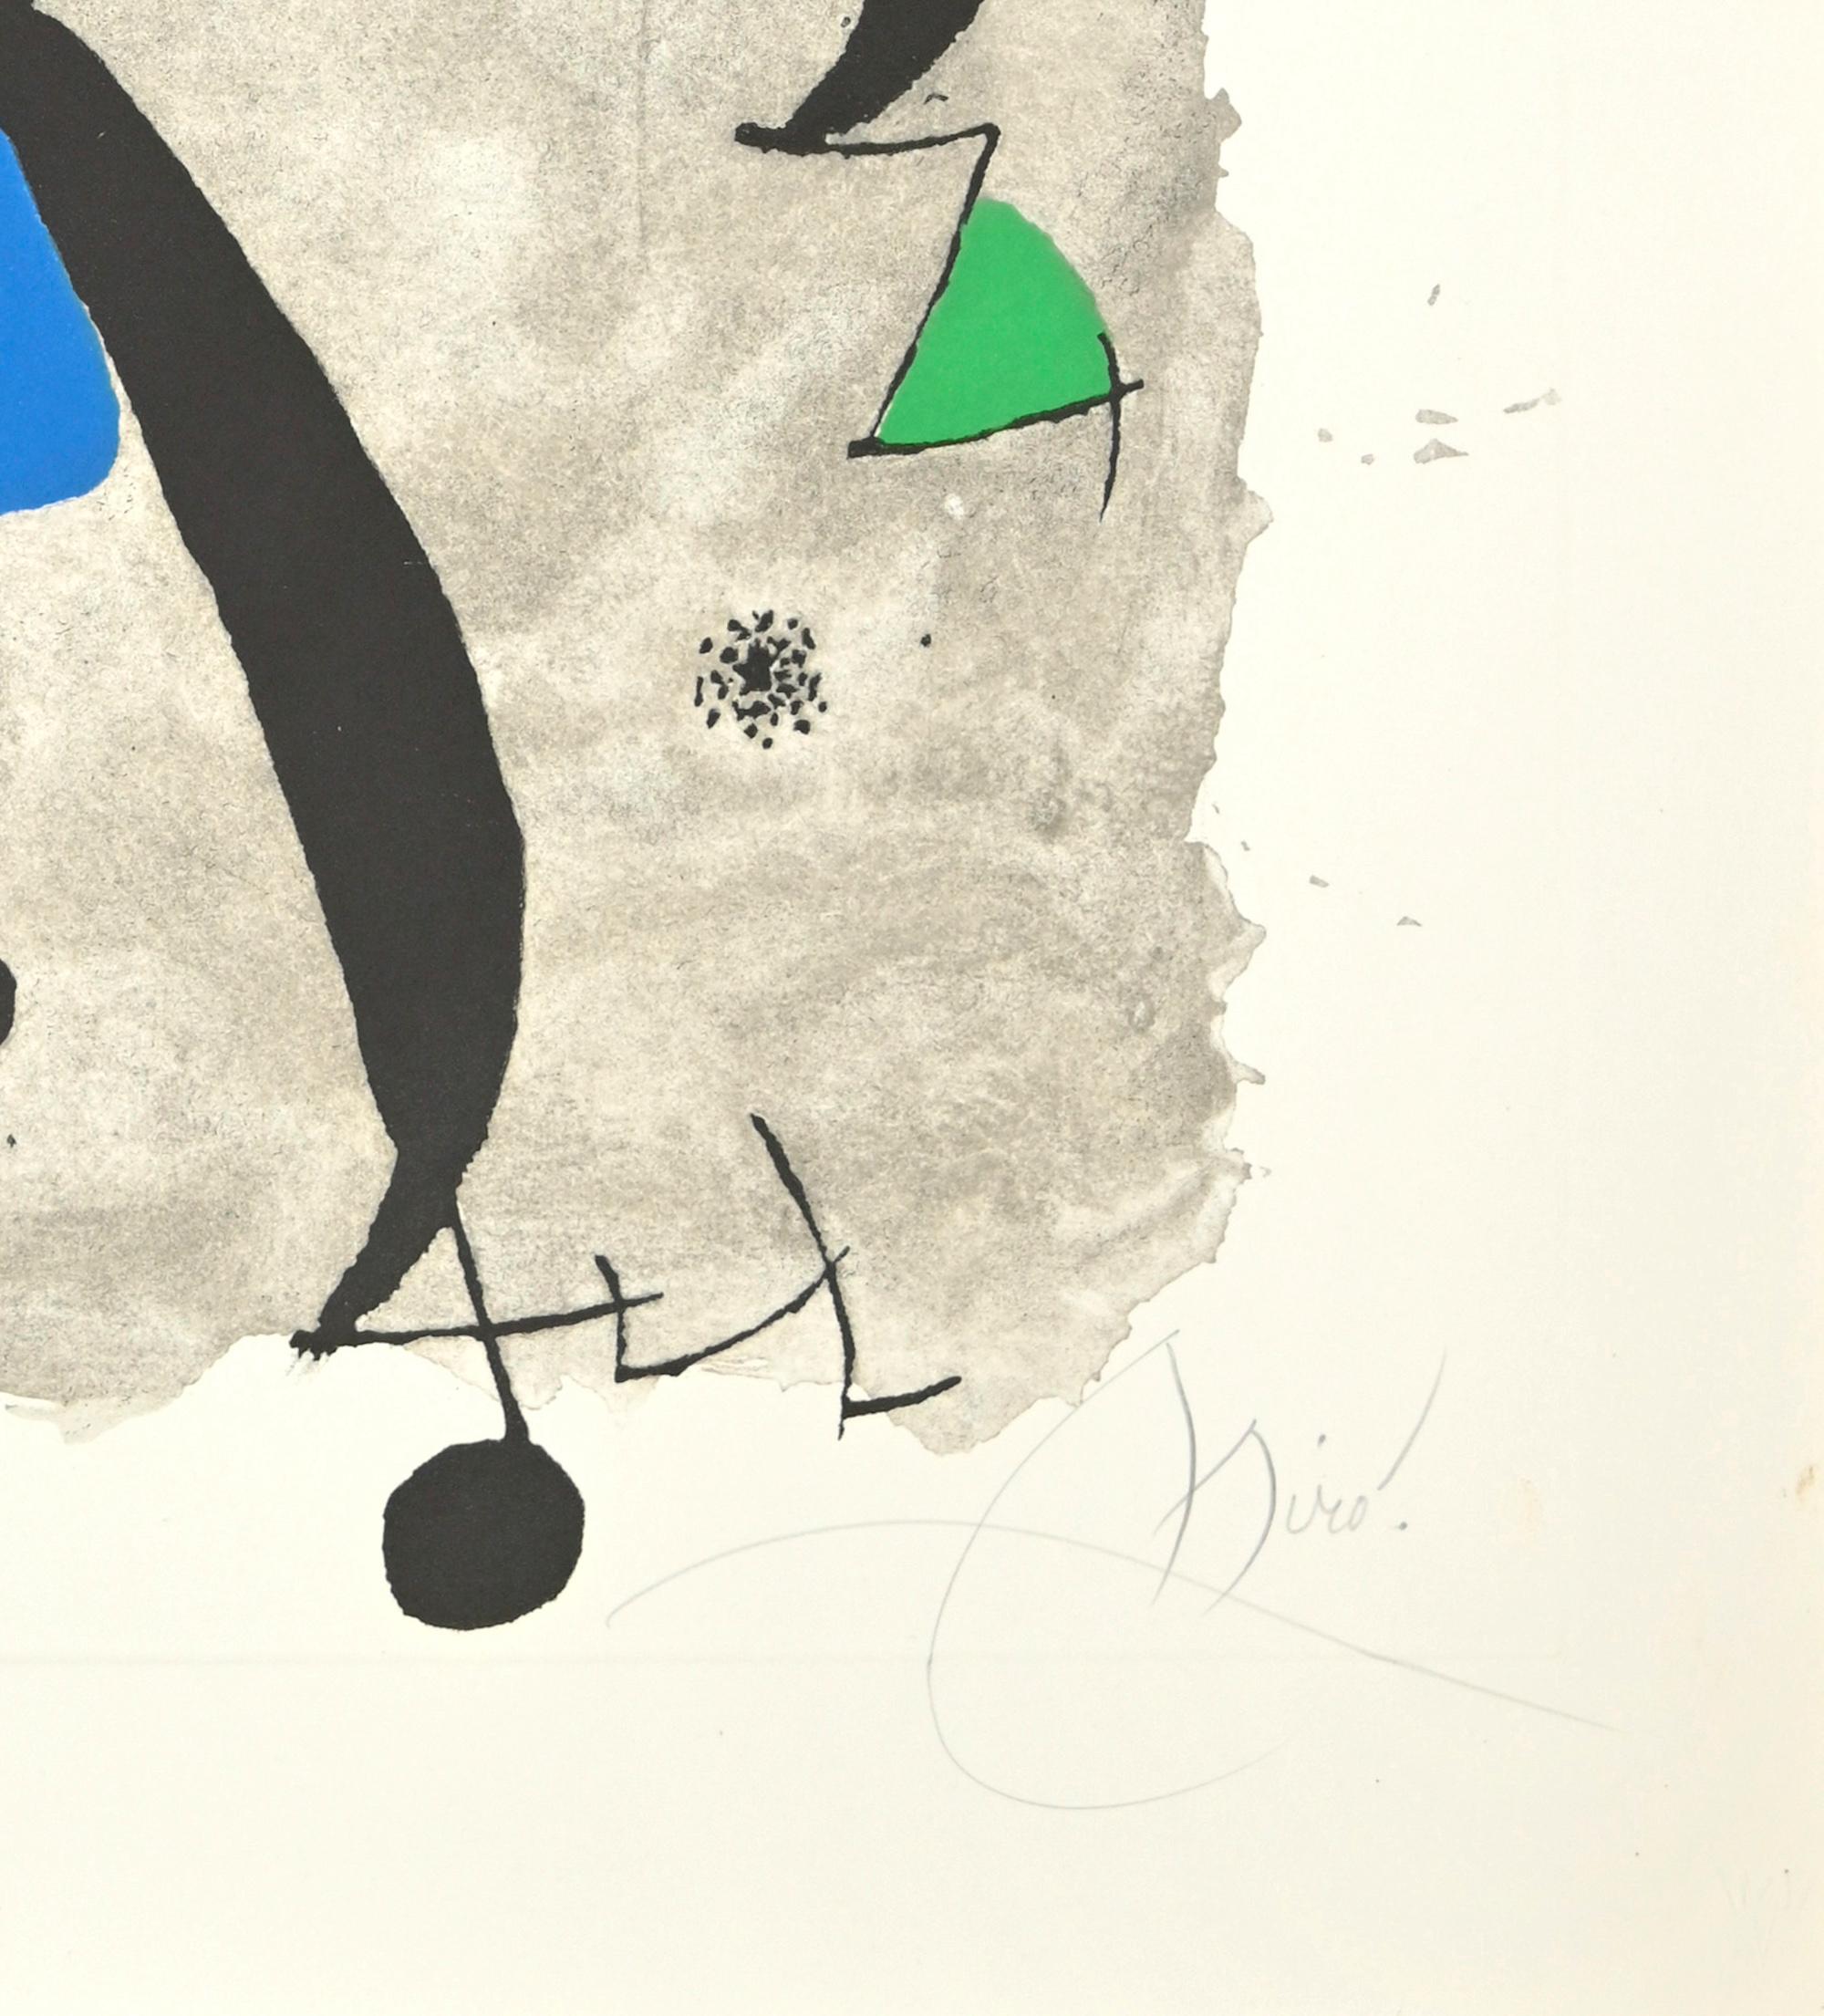 For Alberti, For Spain - Etching by Joan Mirò - 1975 - Print by Joan Miró